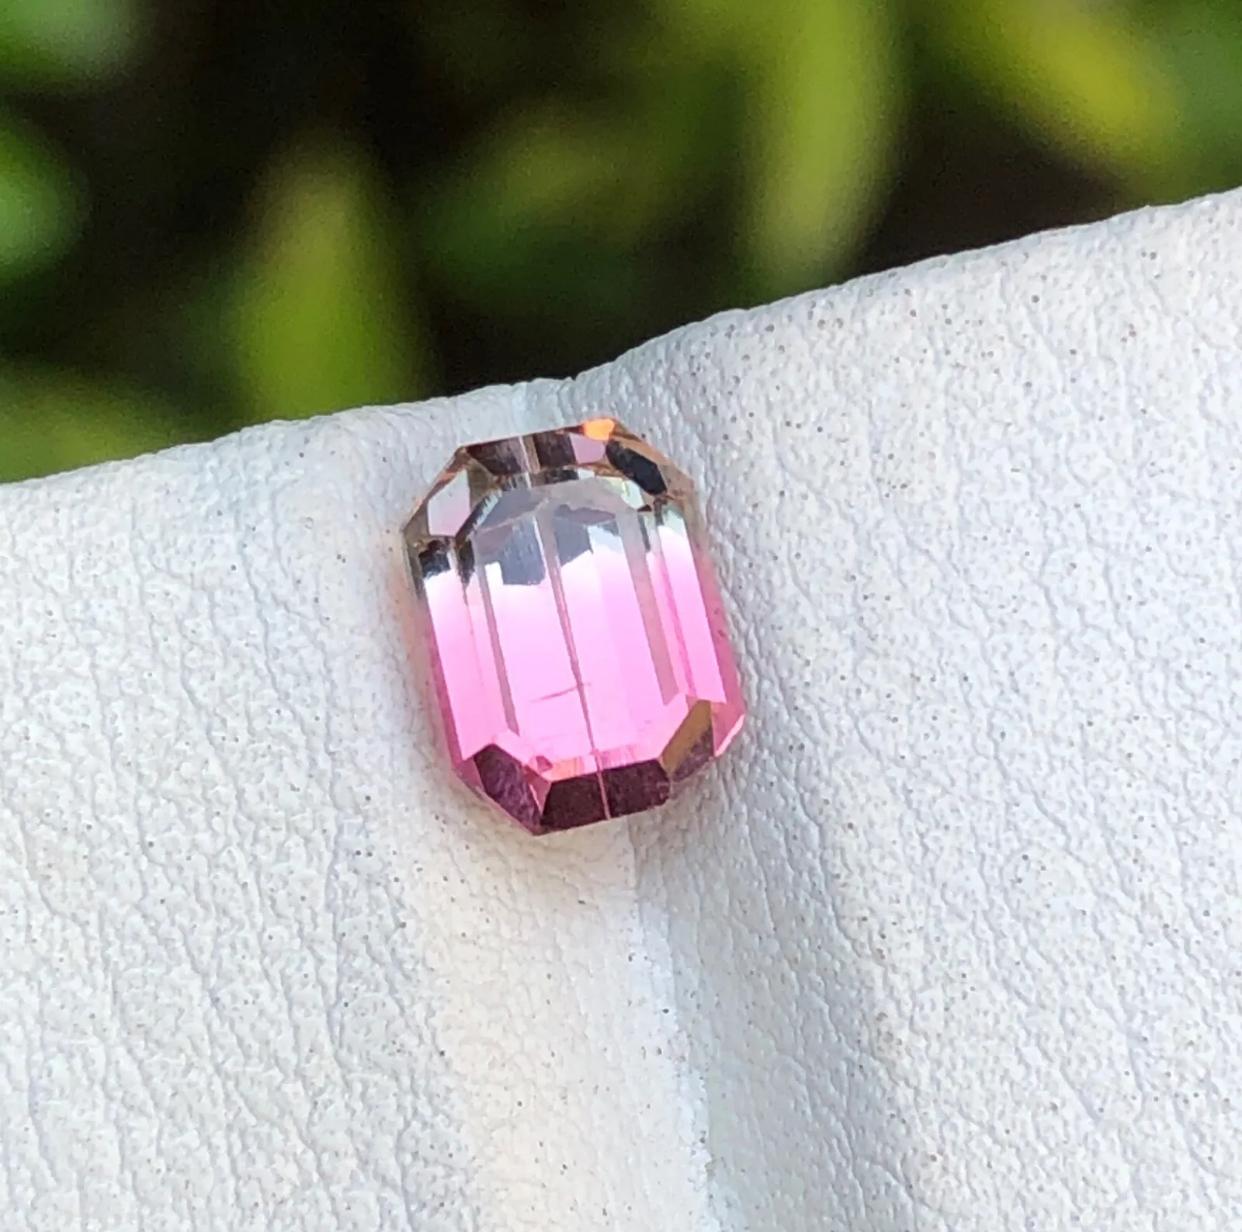 Gemstone Type: Tourmaline
Weight: 1.75 Carats
Dimensions: 7.24 x 5.50 x 5.19
Color: Bicolor
Clarity: Approximately 97% Eye Clean 
Treatment: Heated
Origin: Afghanistan
Certificate: On demand 

Indulge in the enchantment of our rare Pink Bicolor